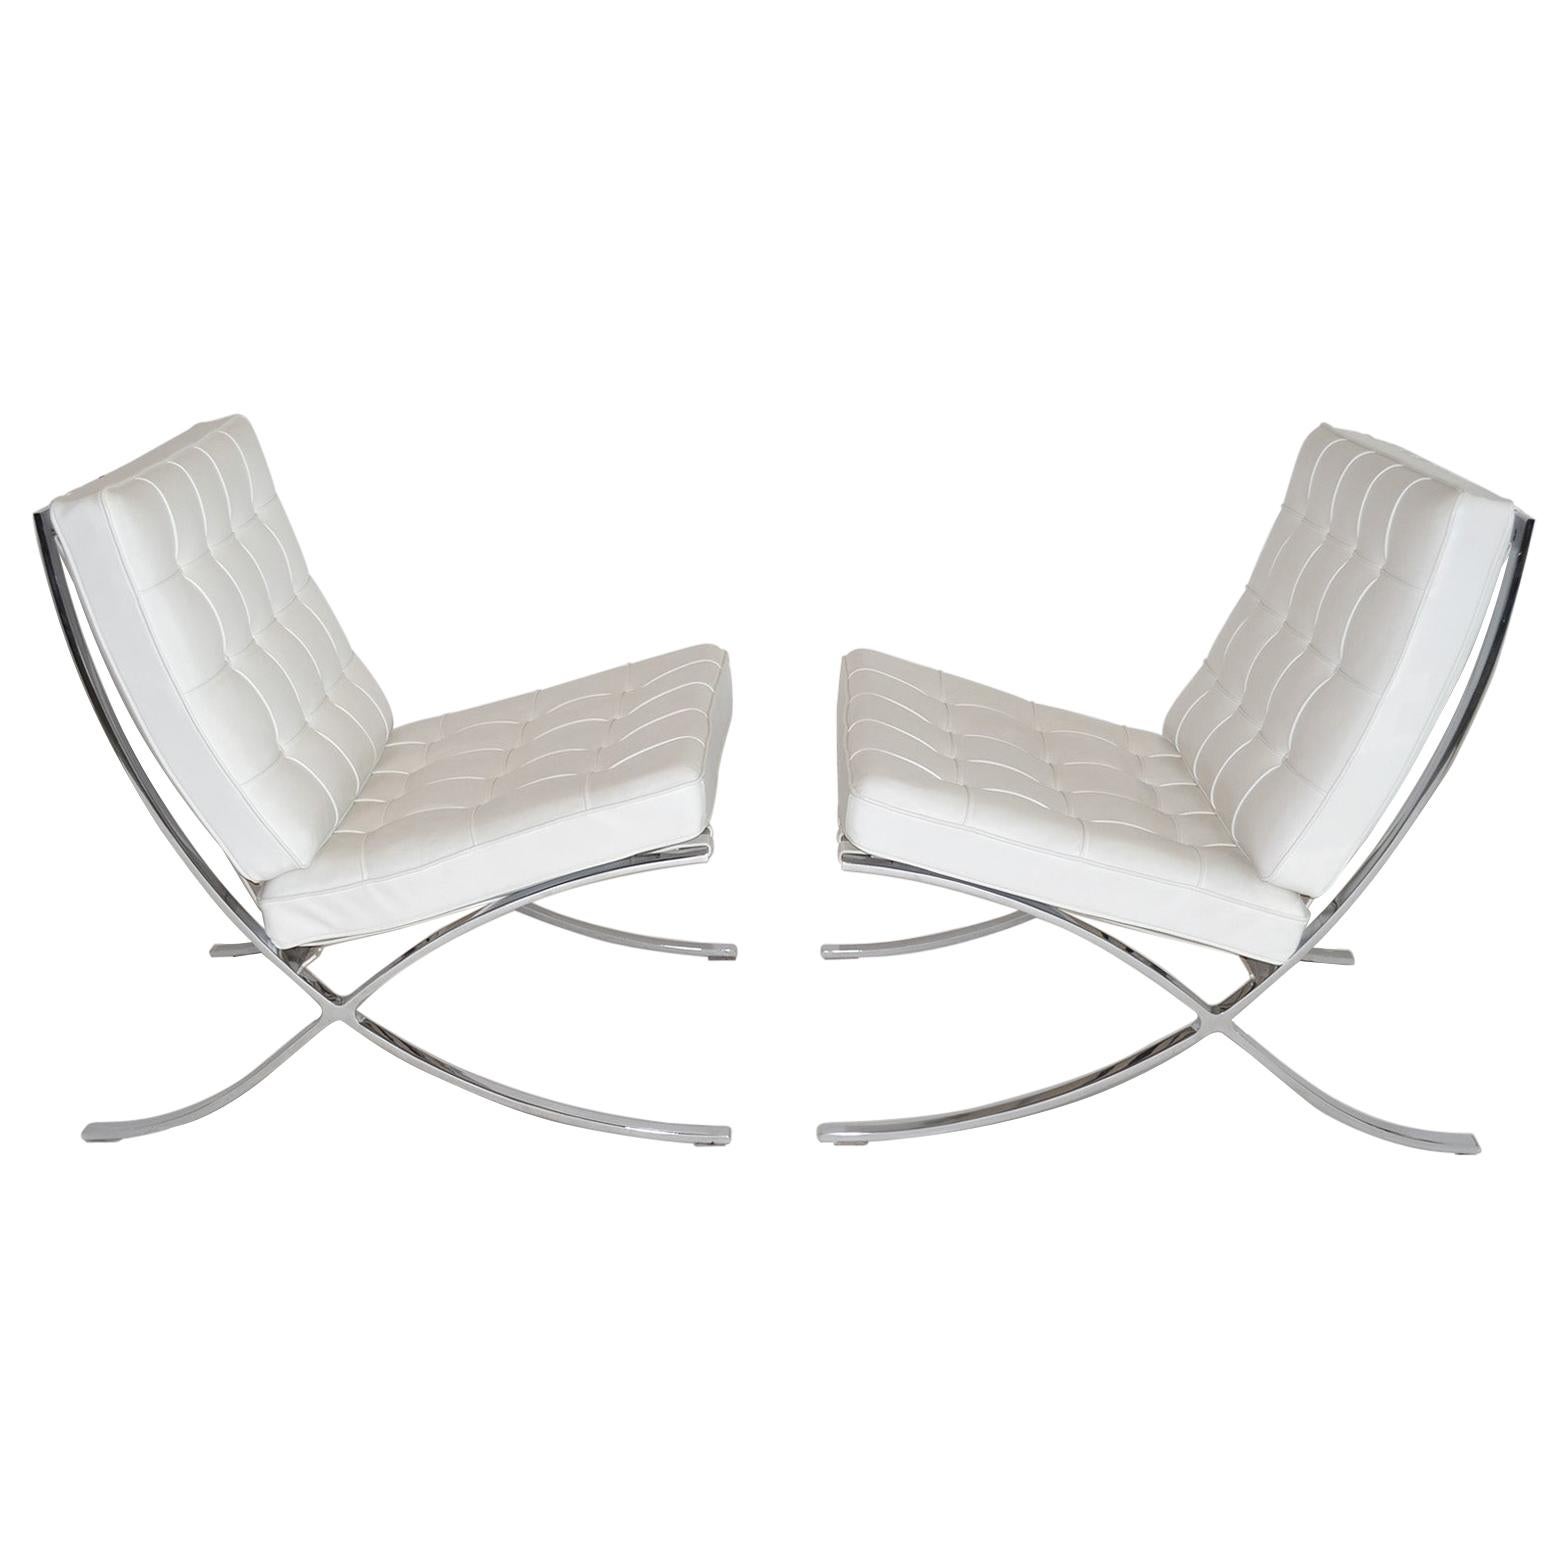 Pair of Knoll Barcelona Lounge Chairs in White Sabrina Leather Circa 2000s